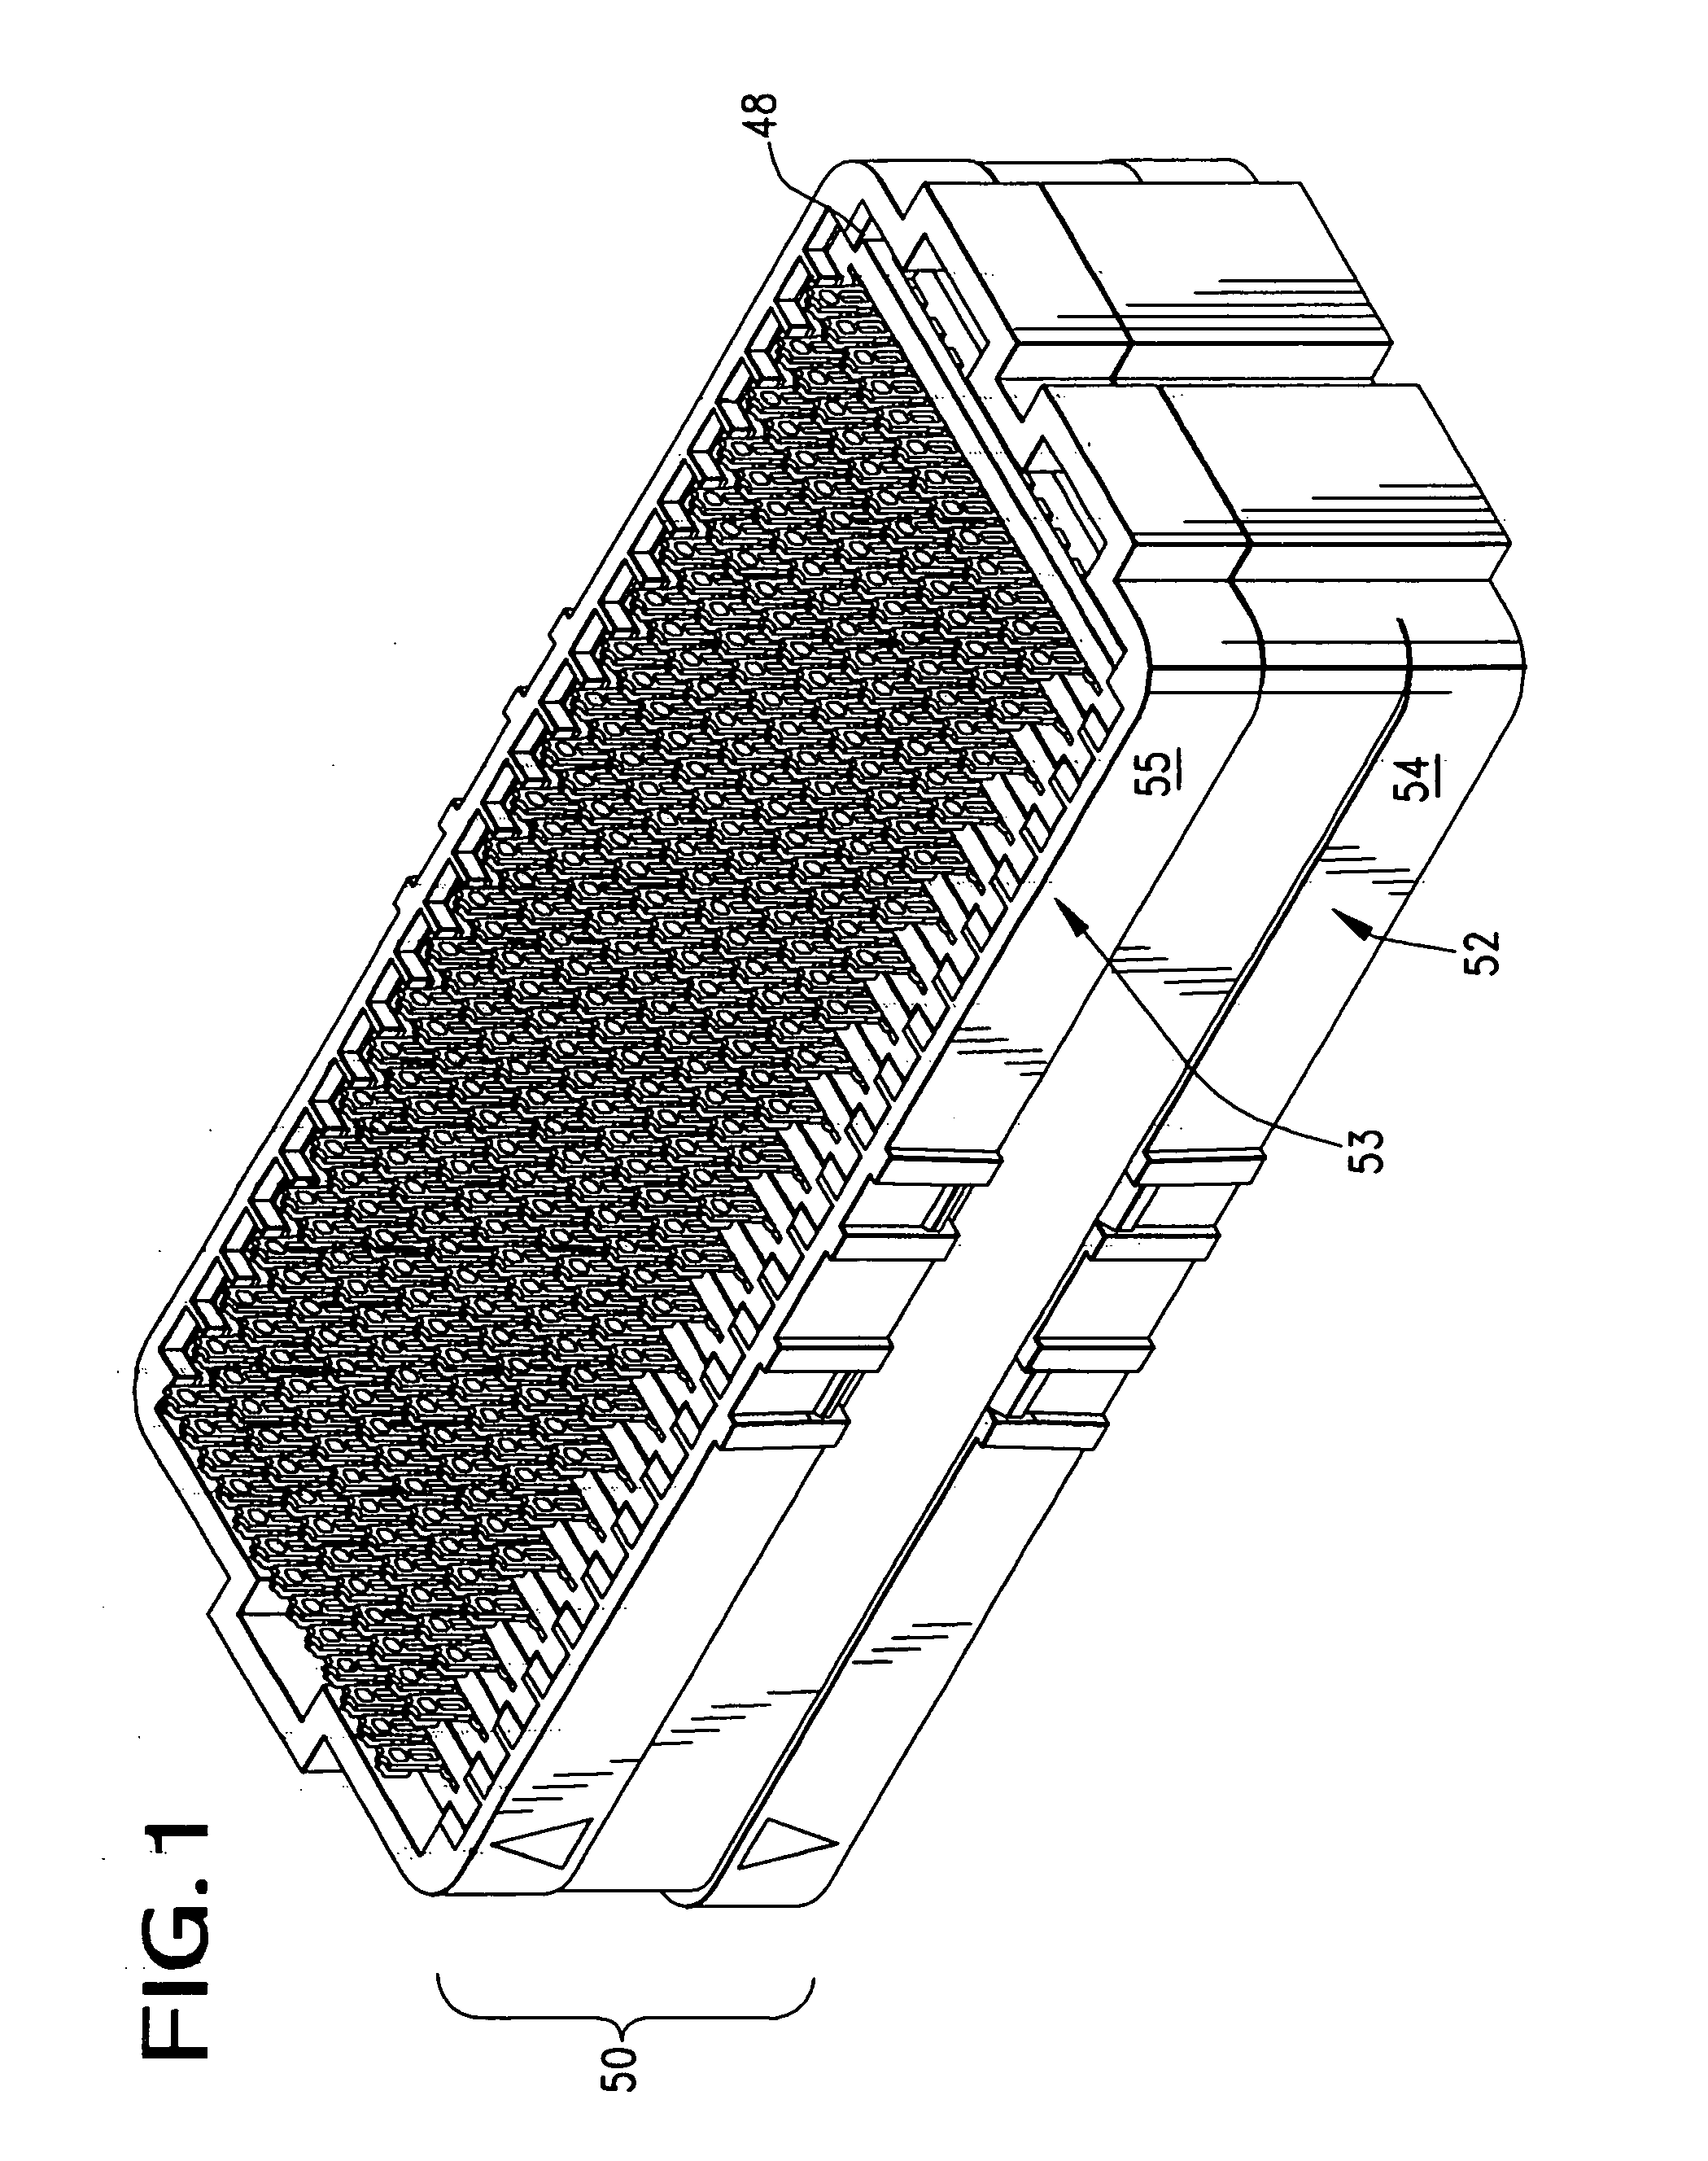 Connector with improved dual beam contacts